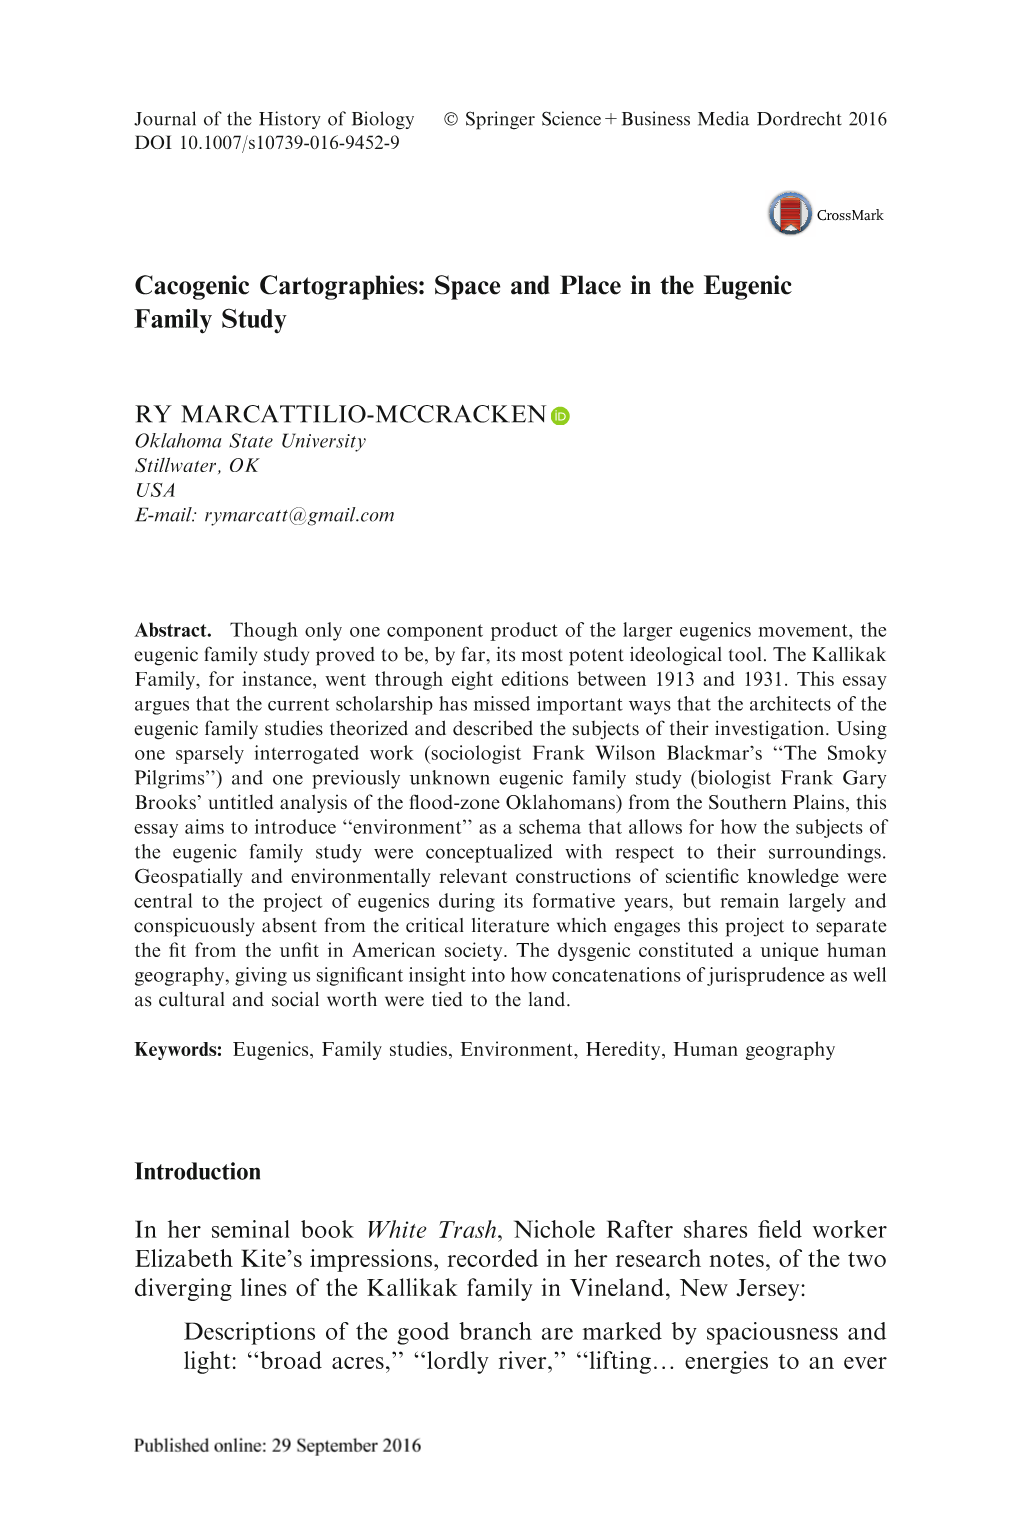 Cacogenic Cartographies: Space and Place in the Eugenic Family Study